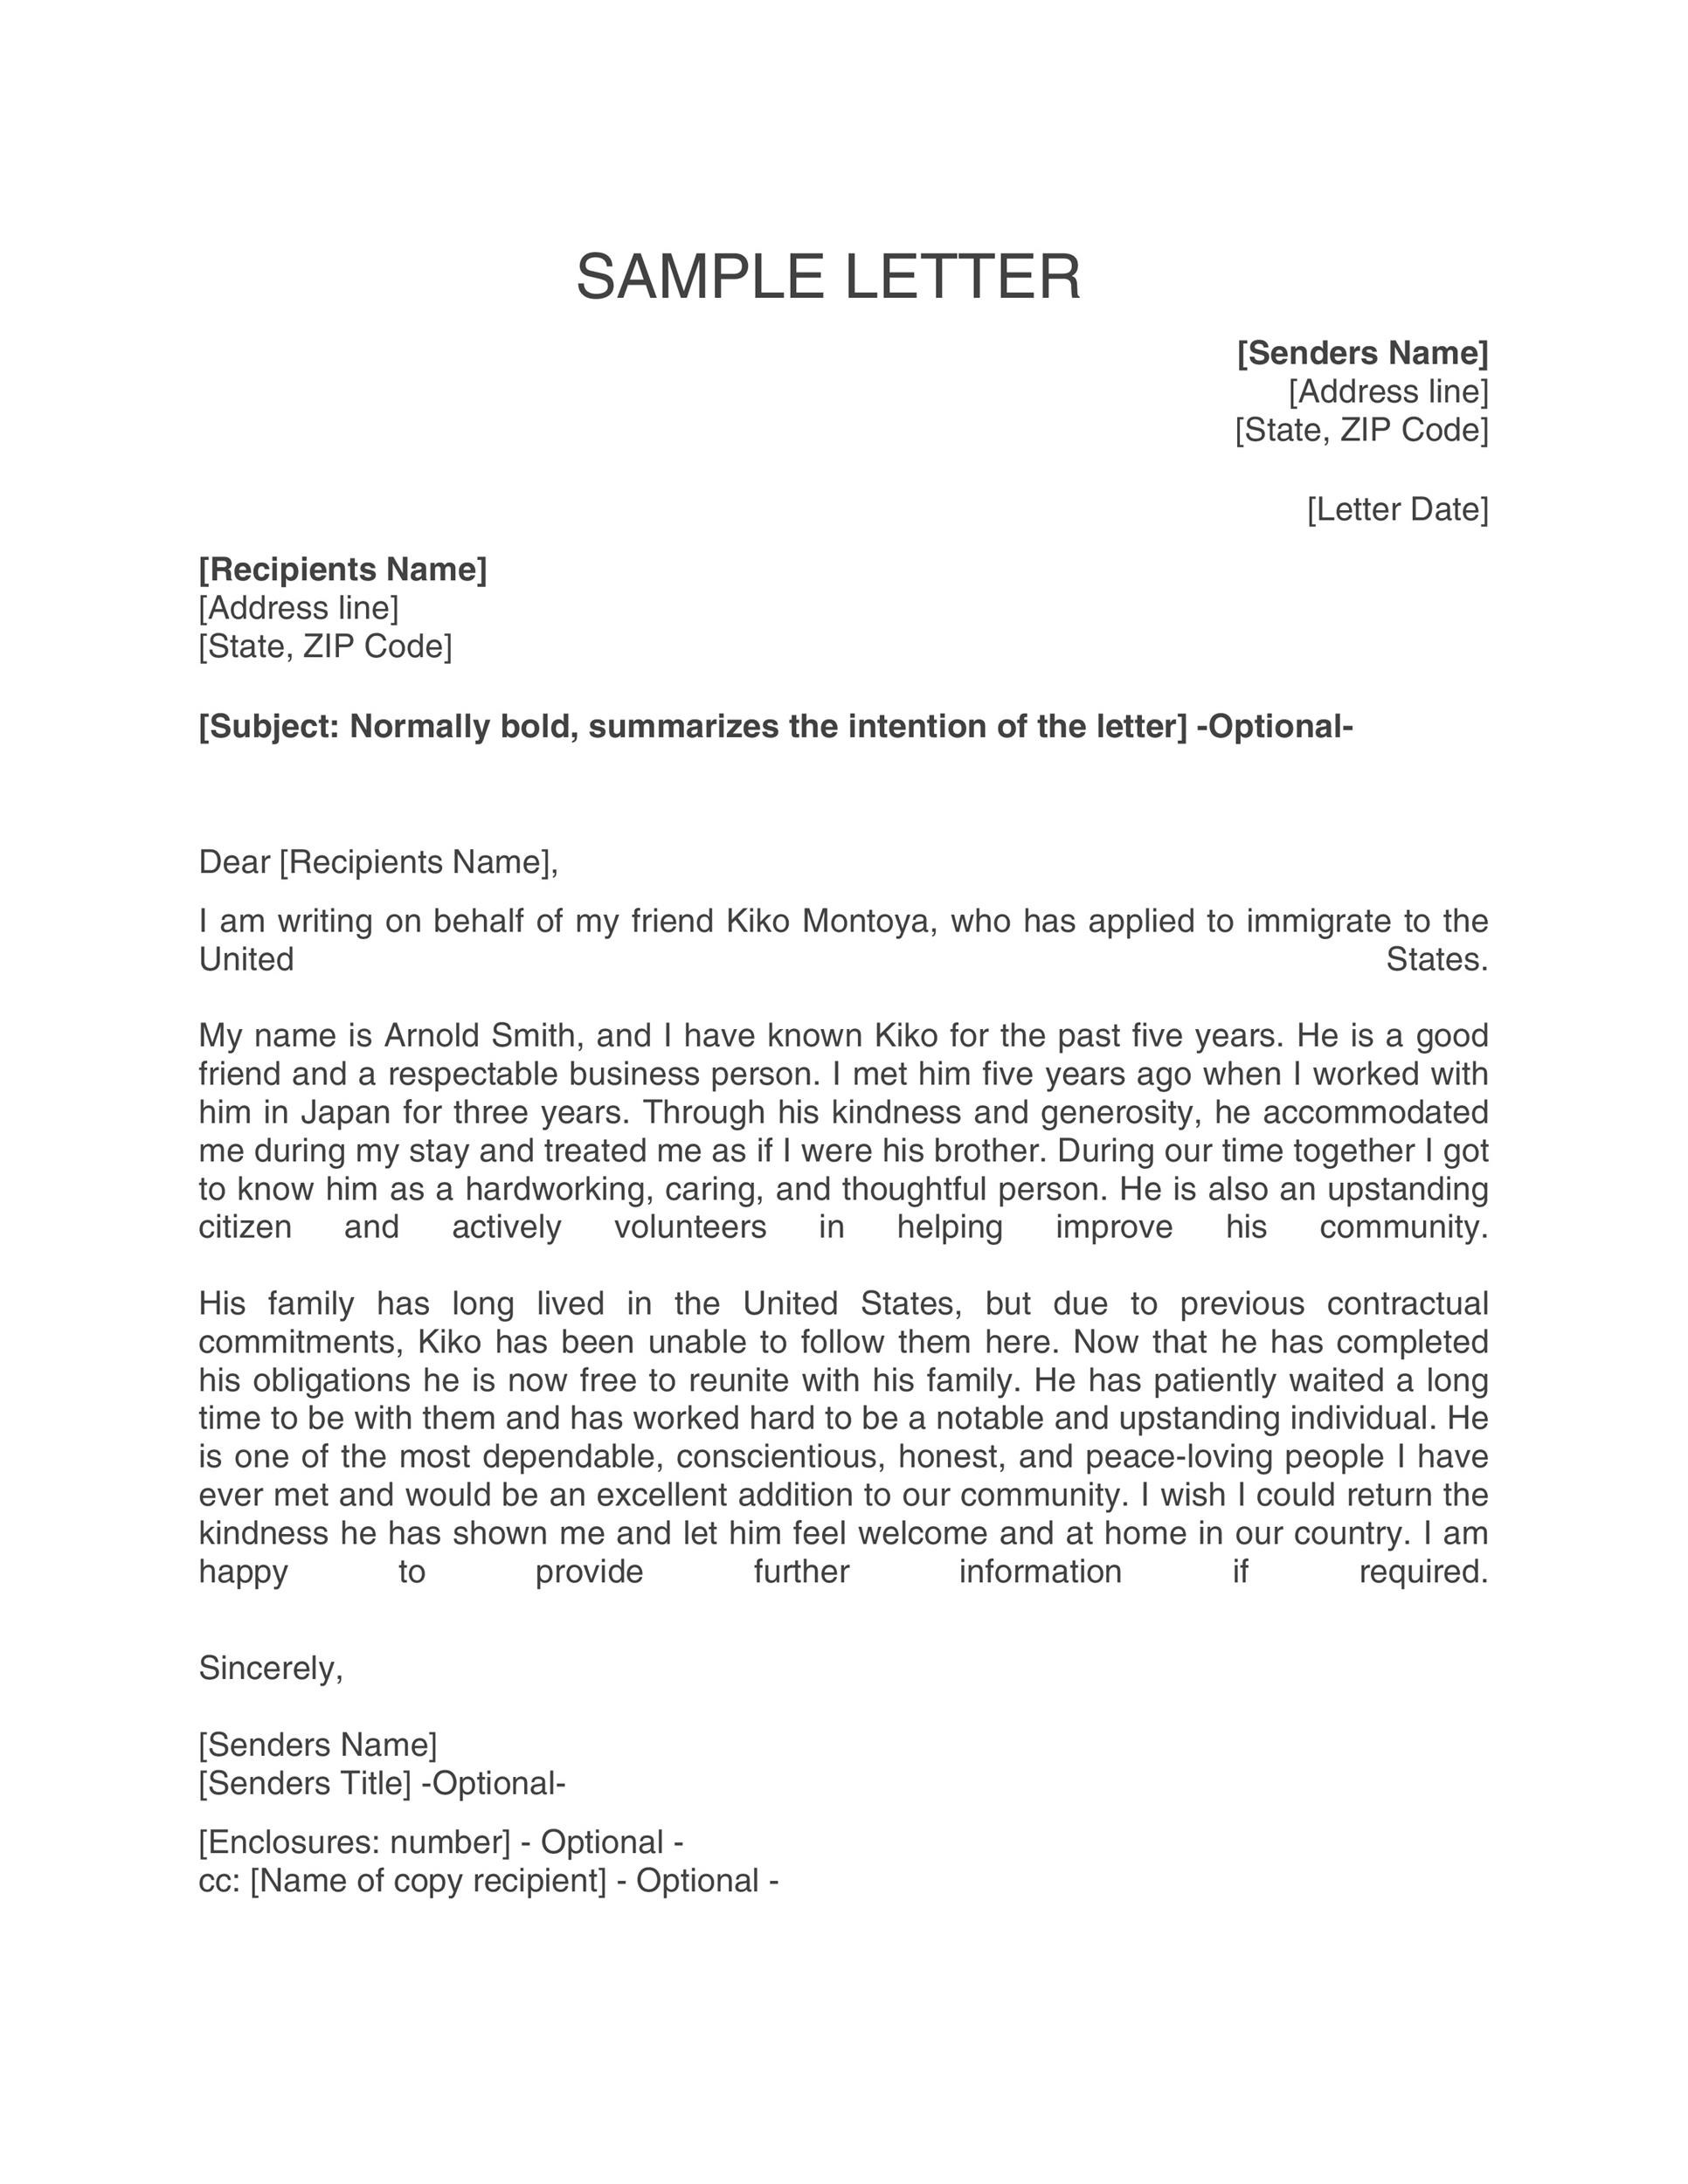 Letter Of Recommendation For A Friend For Immigration from templatelab.com